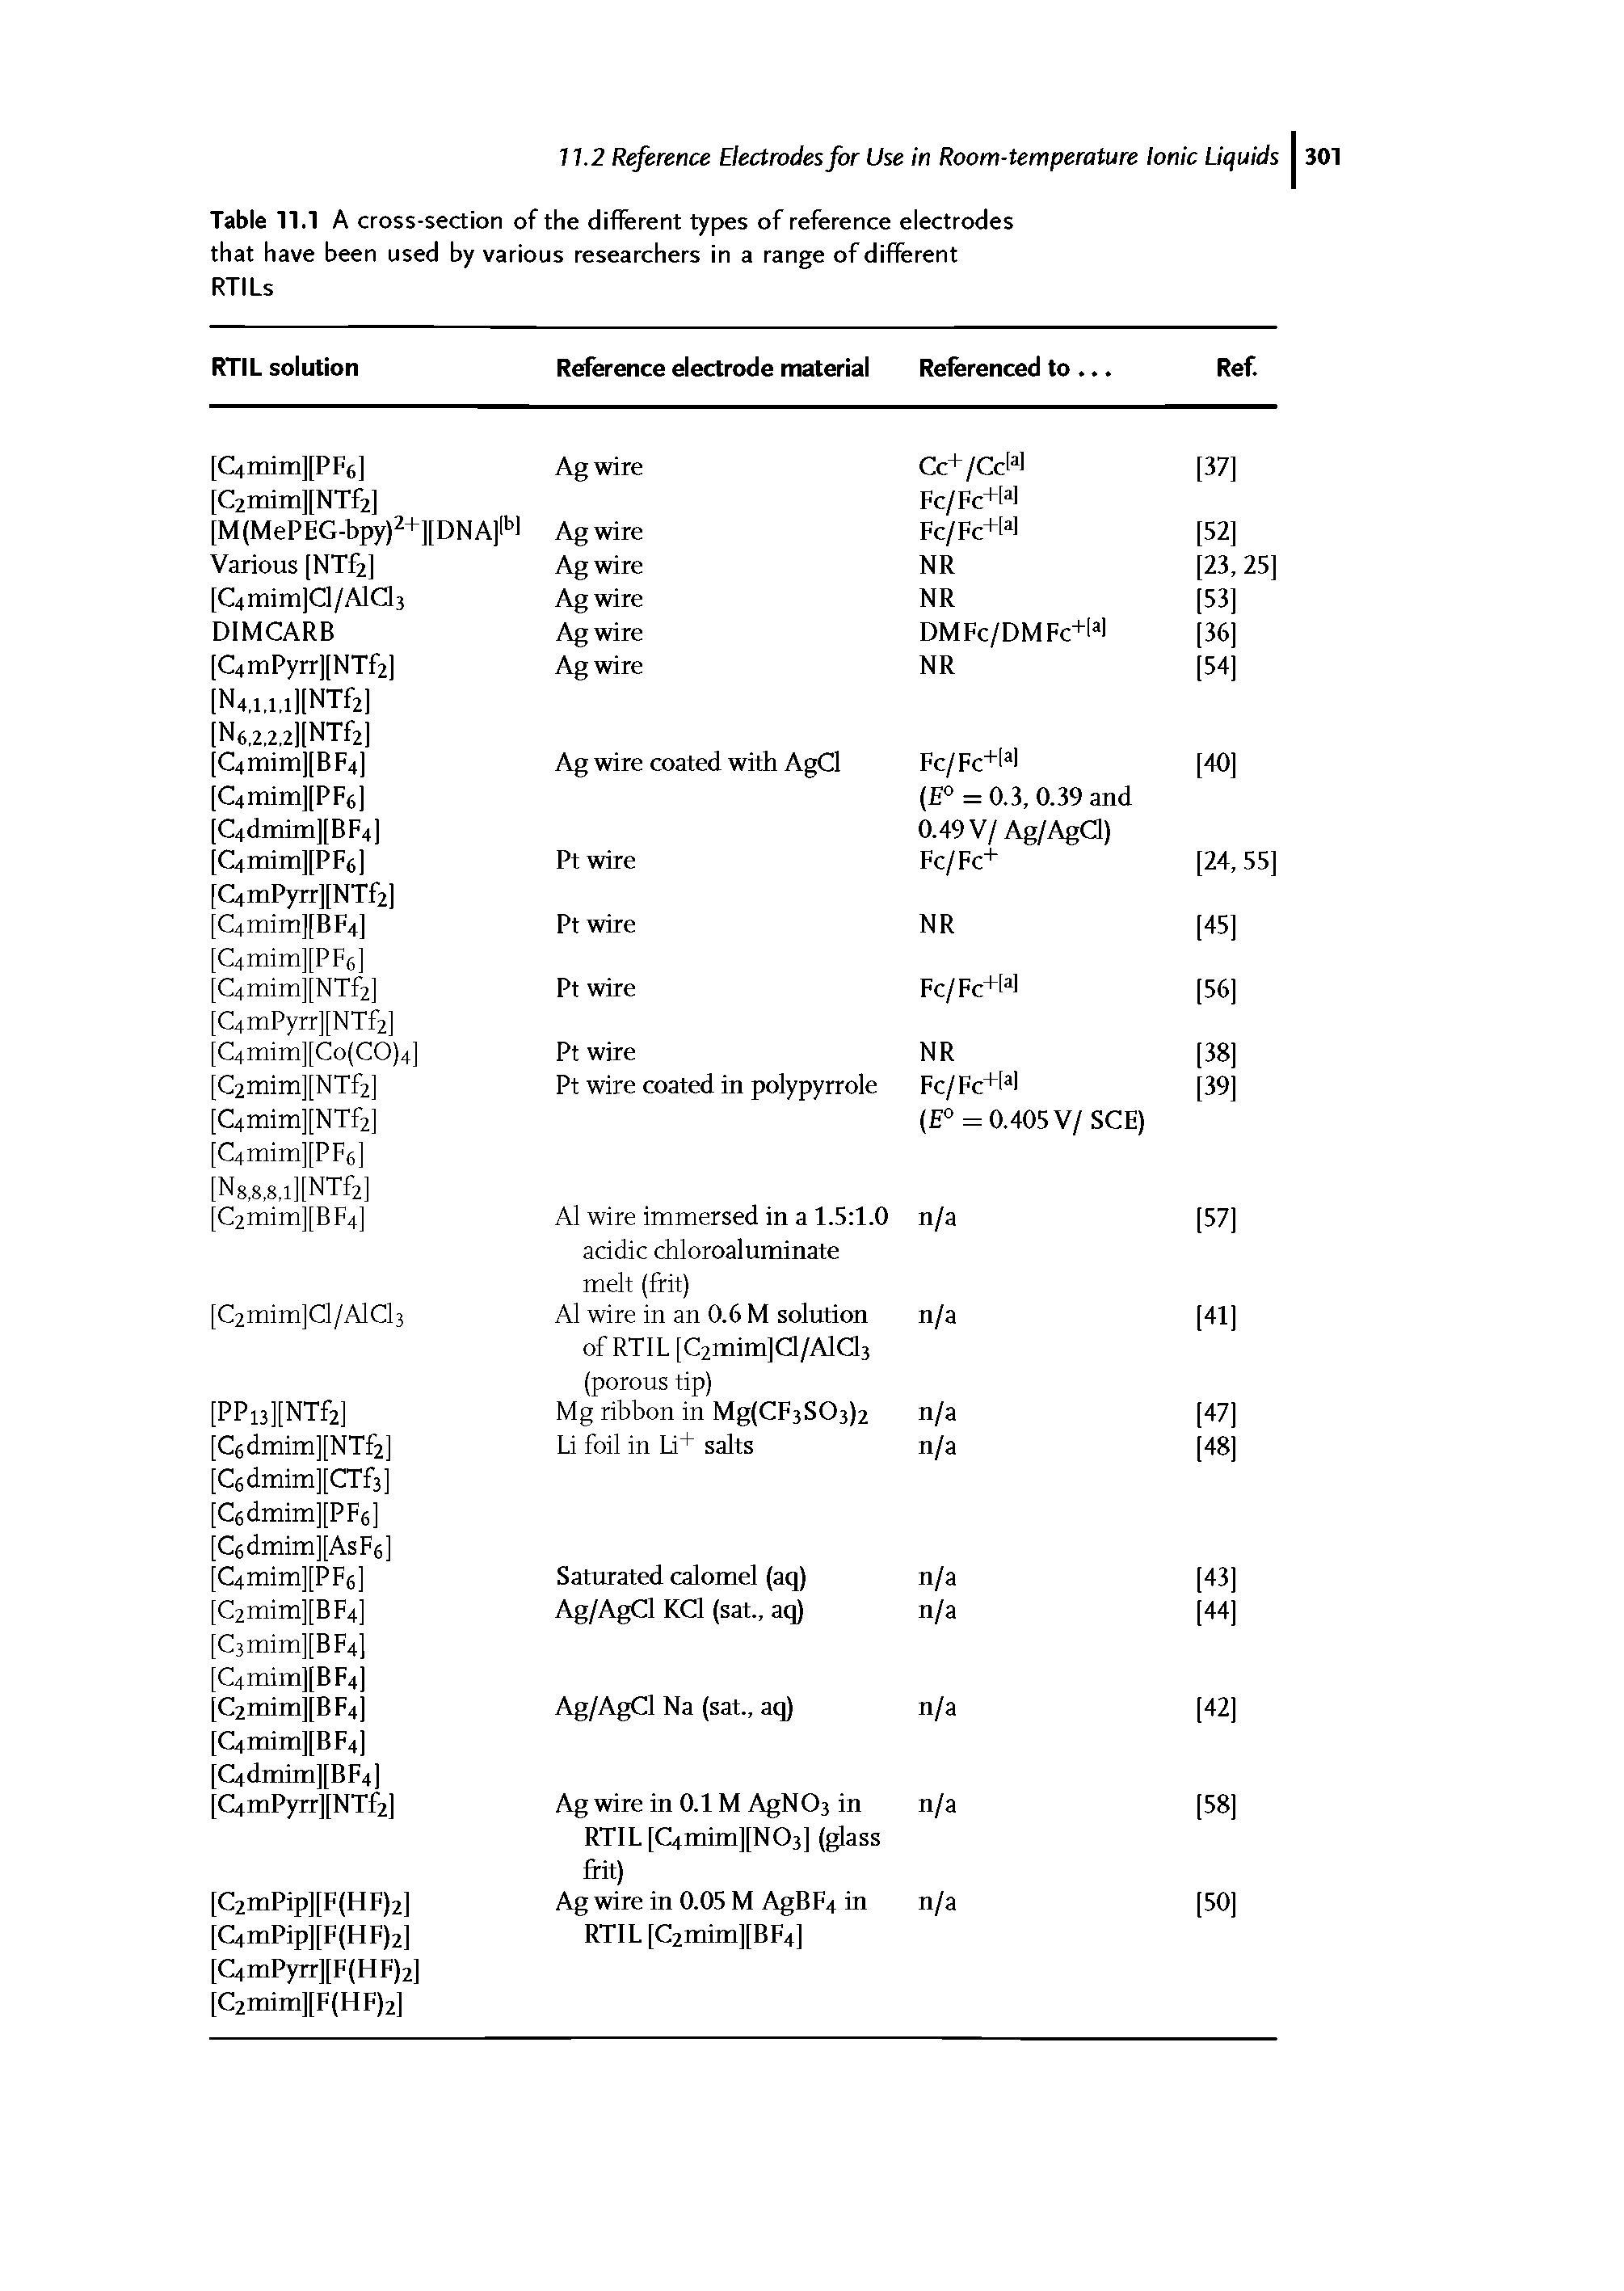 Table 11.1 A cross-section of the different types of reference electrodes that have been used by various researchers in a range of different...